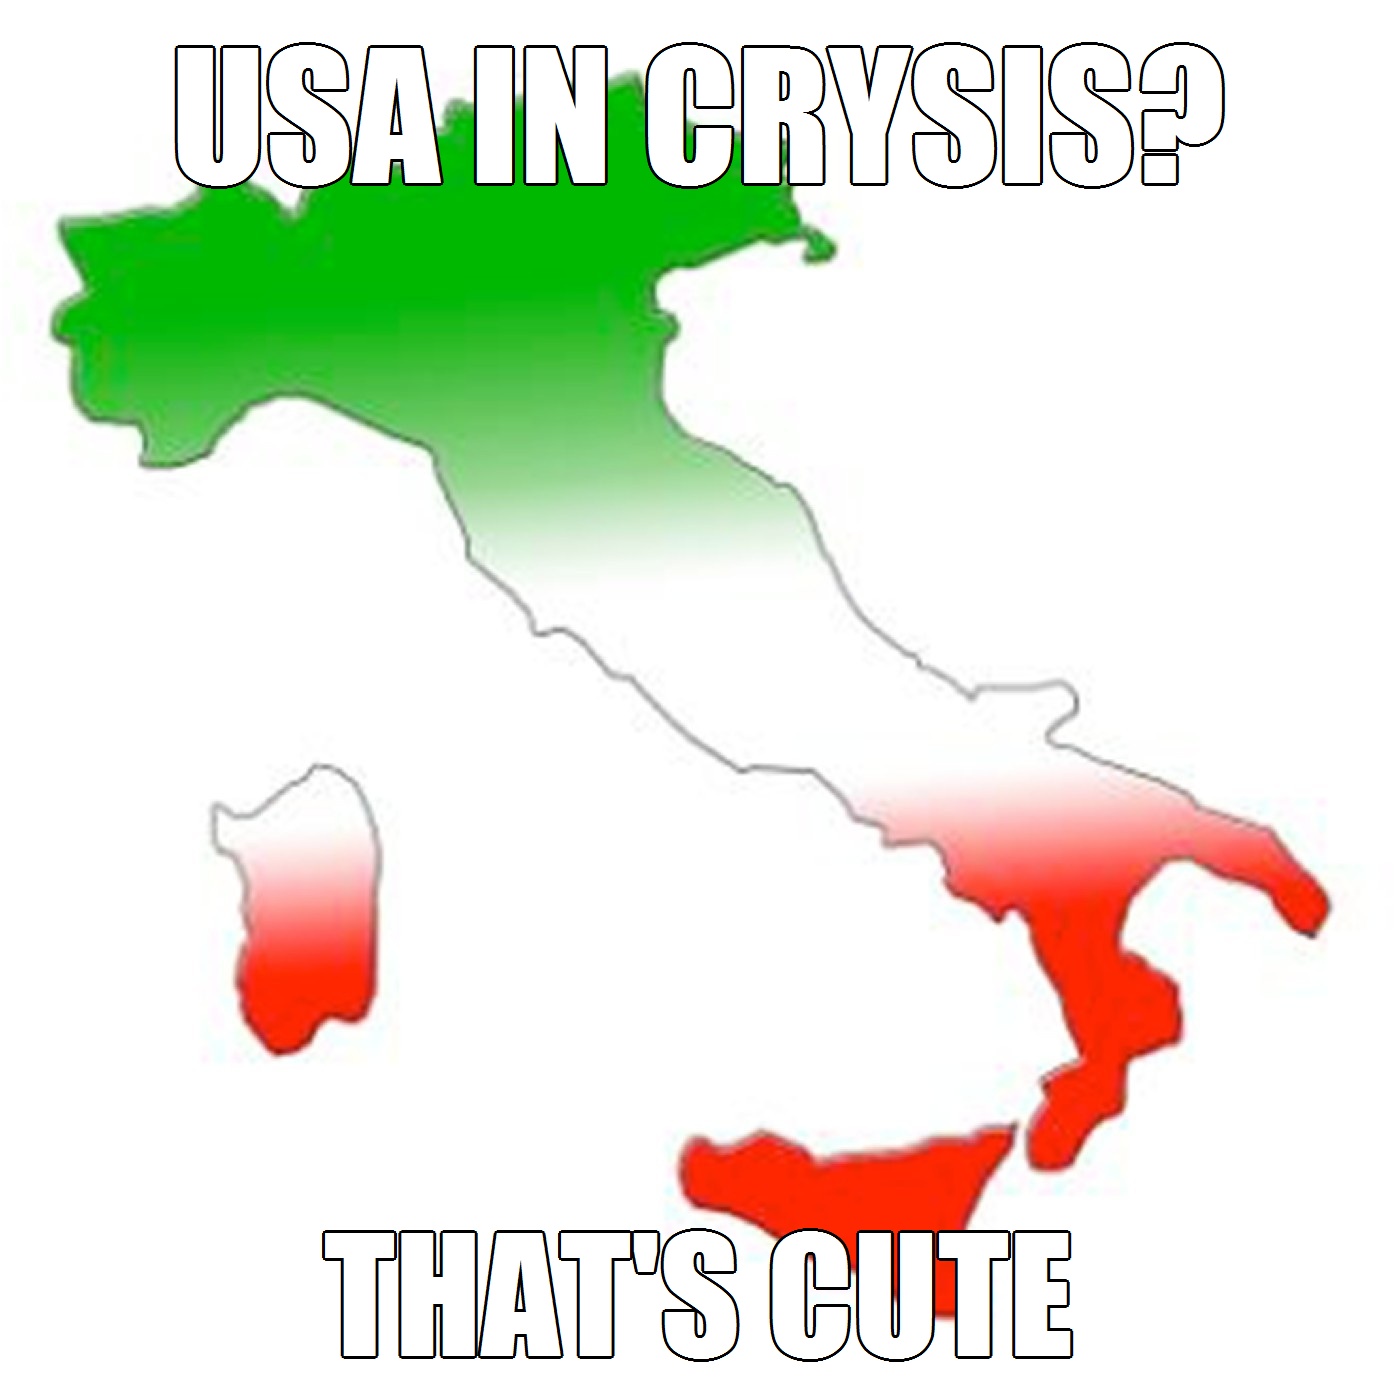 I'm Italian, and this is silly for me